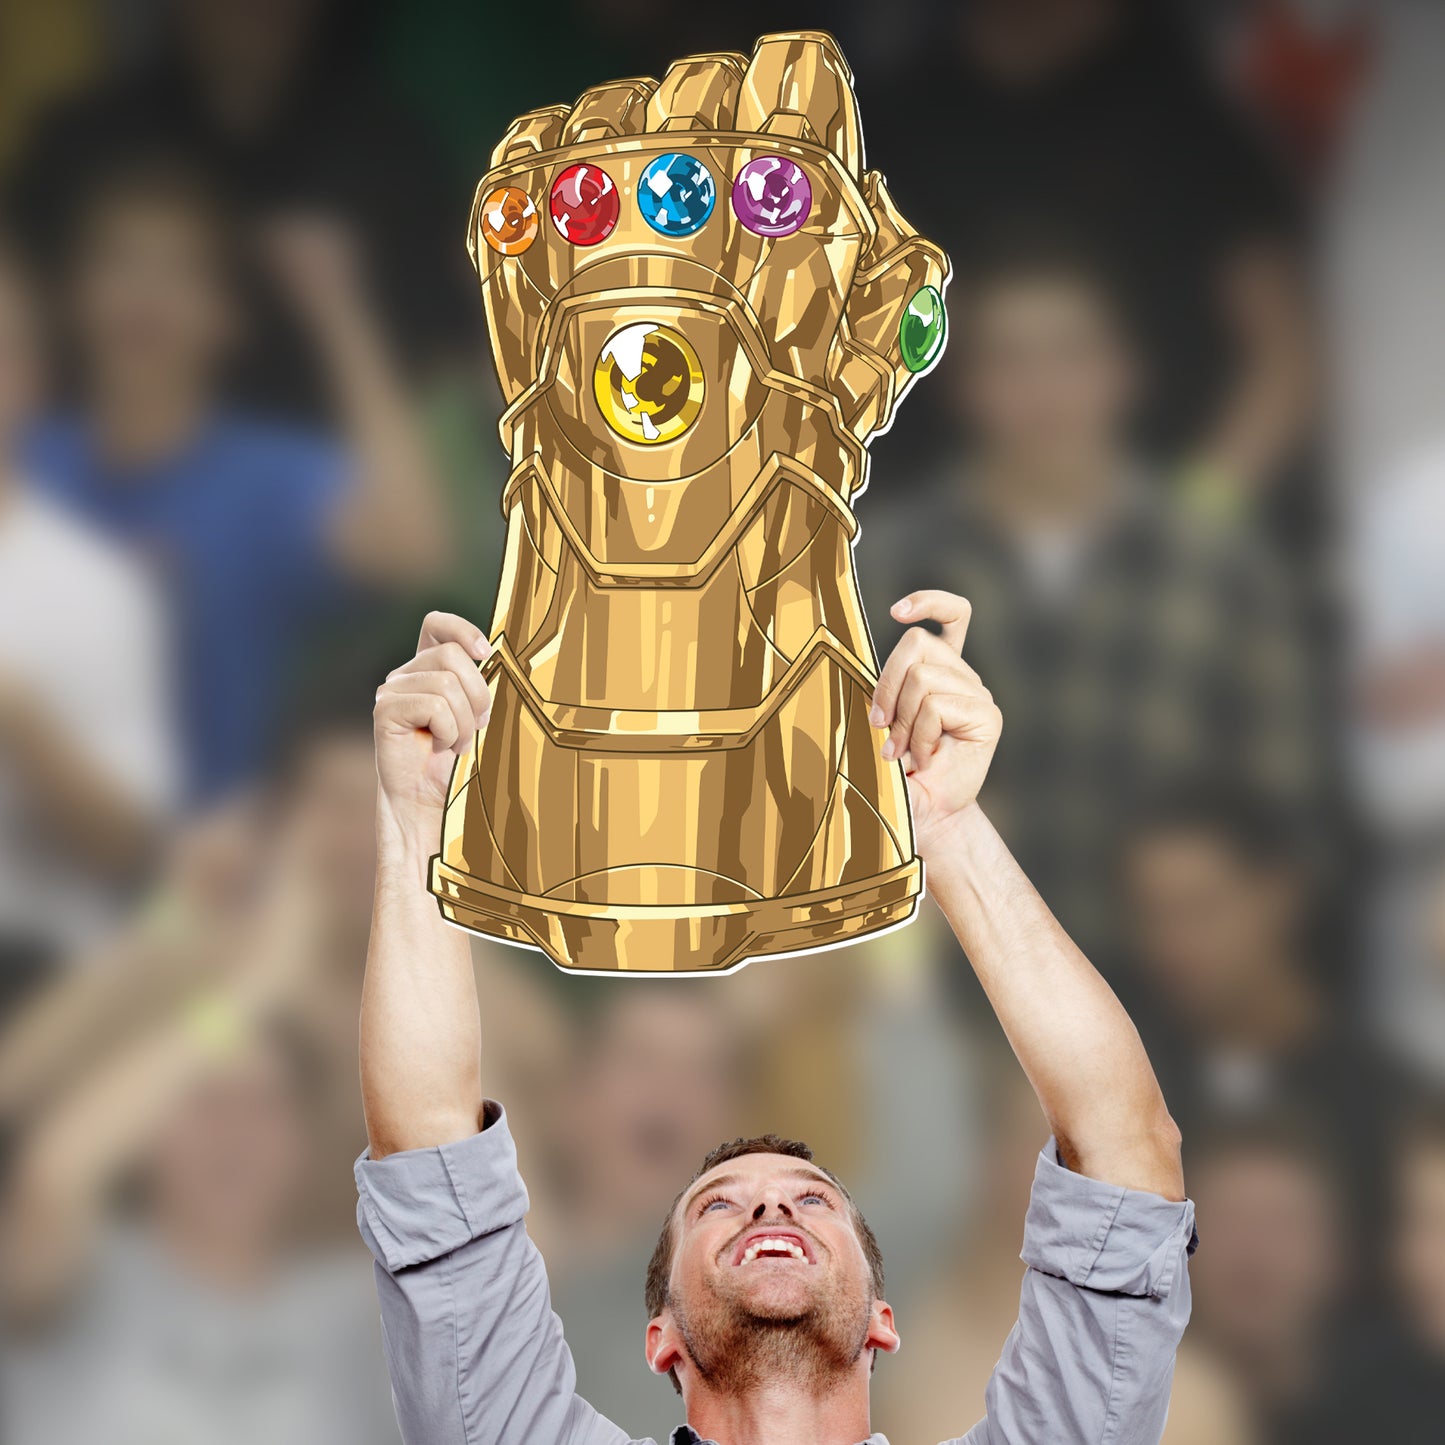 Avengers: Thanos Infinity Gauntlet Foam Core Cutout - Officially Licensed Marvel Big Head